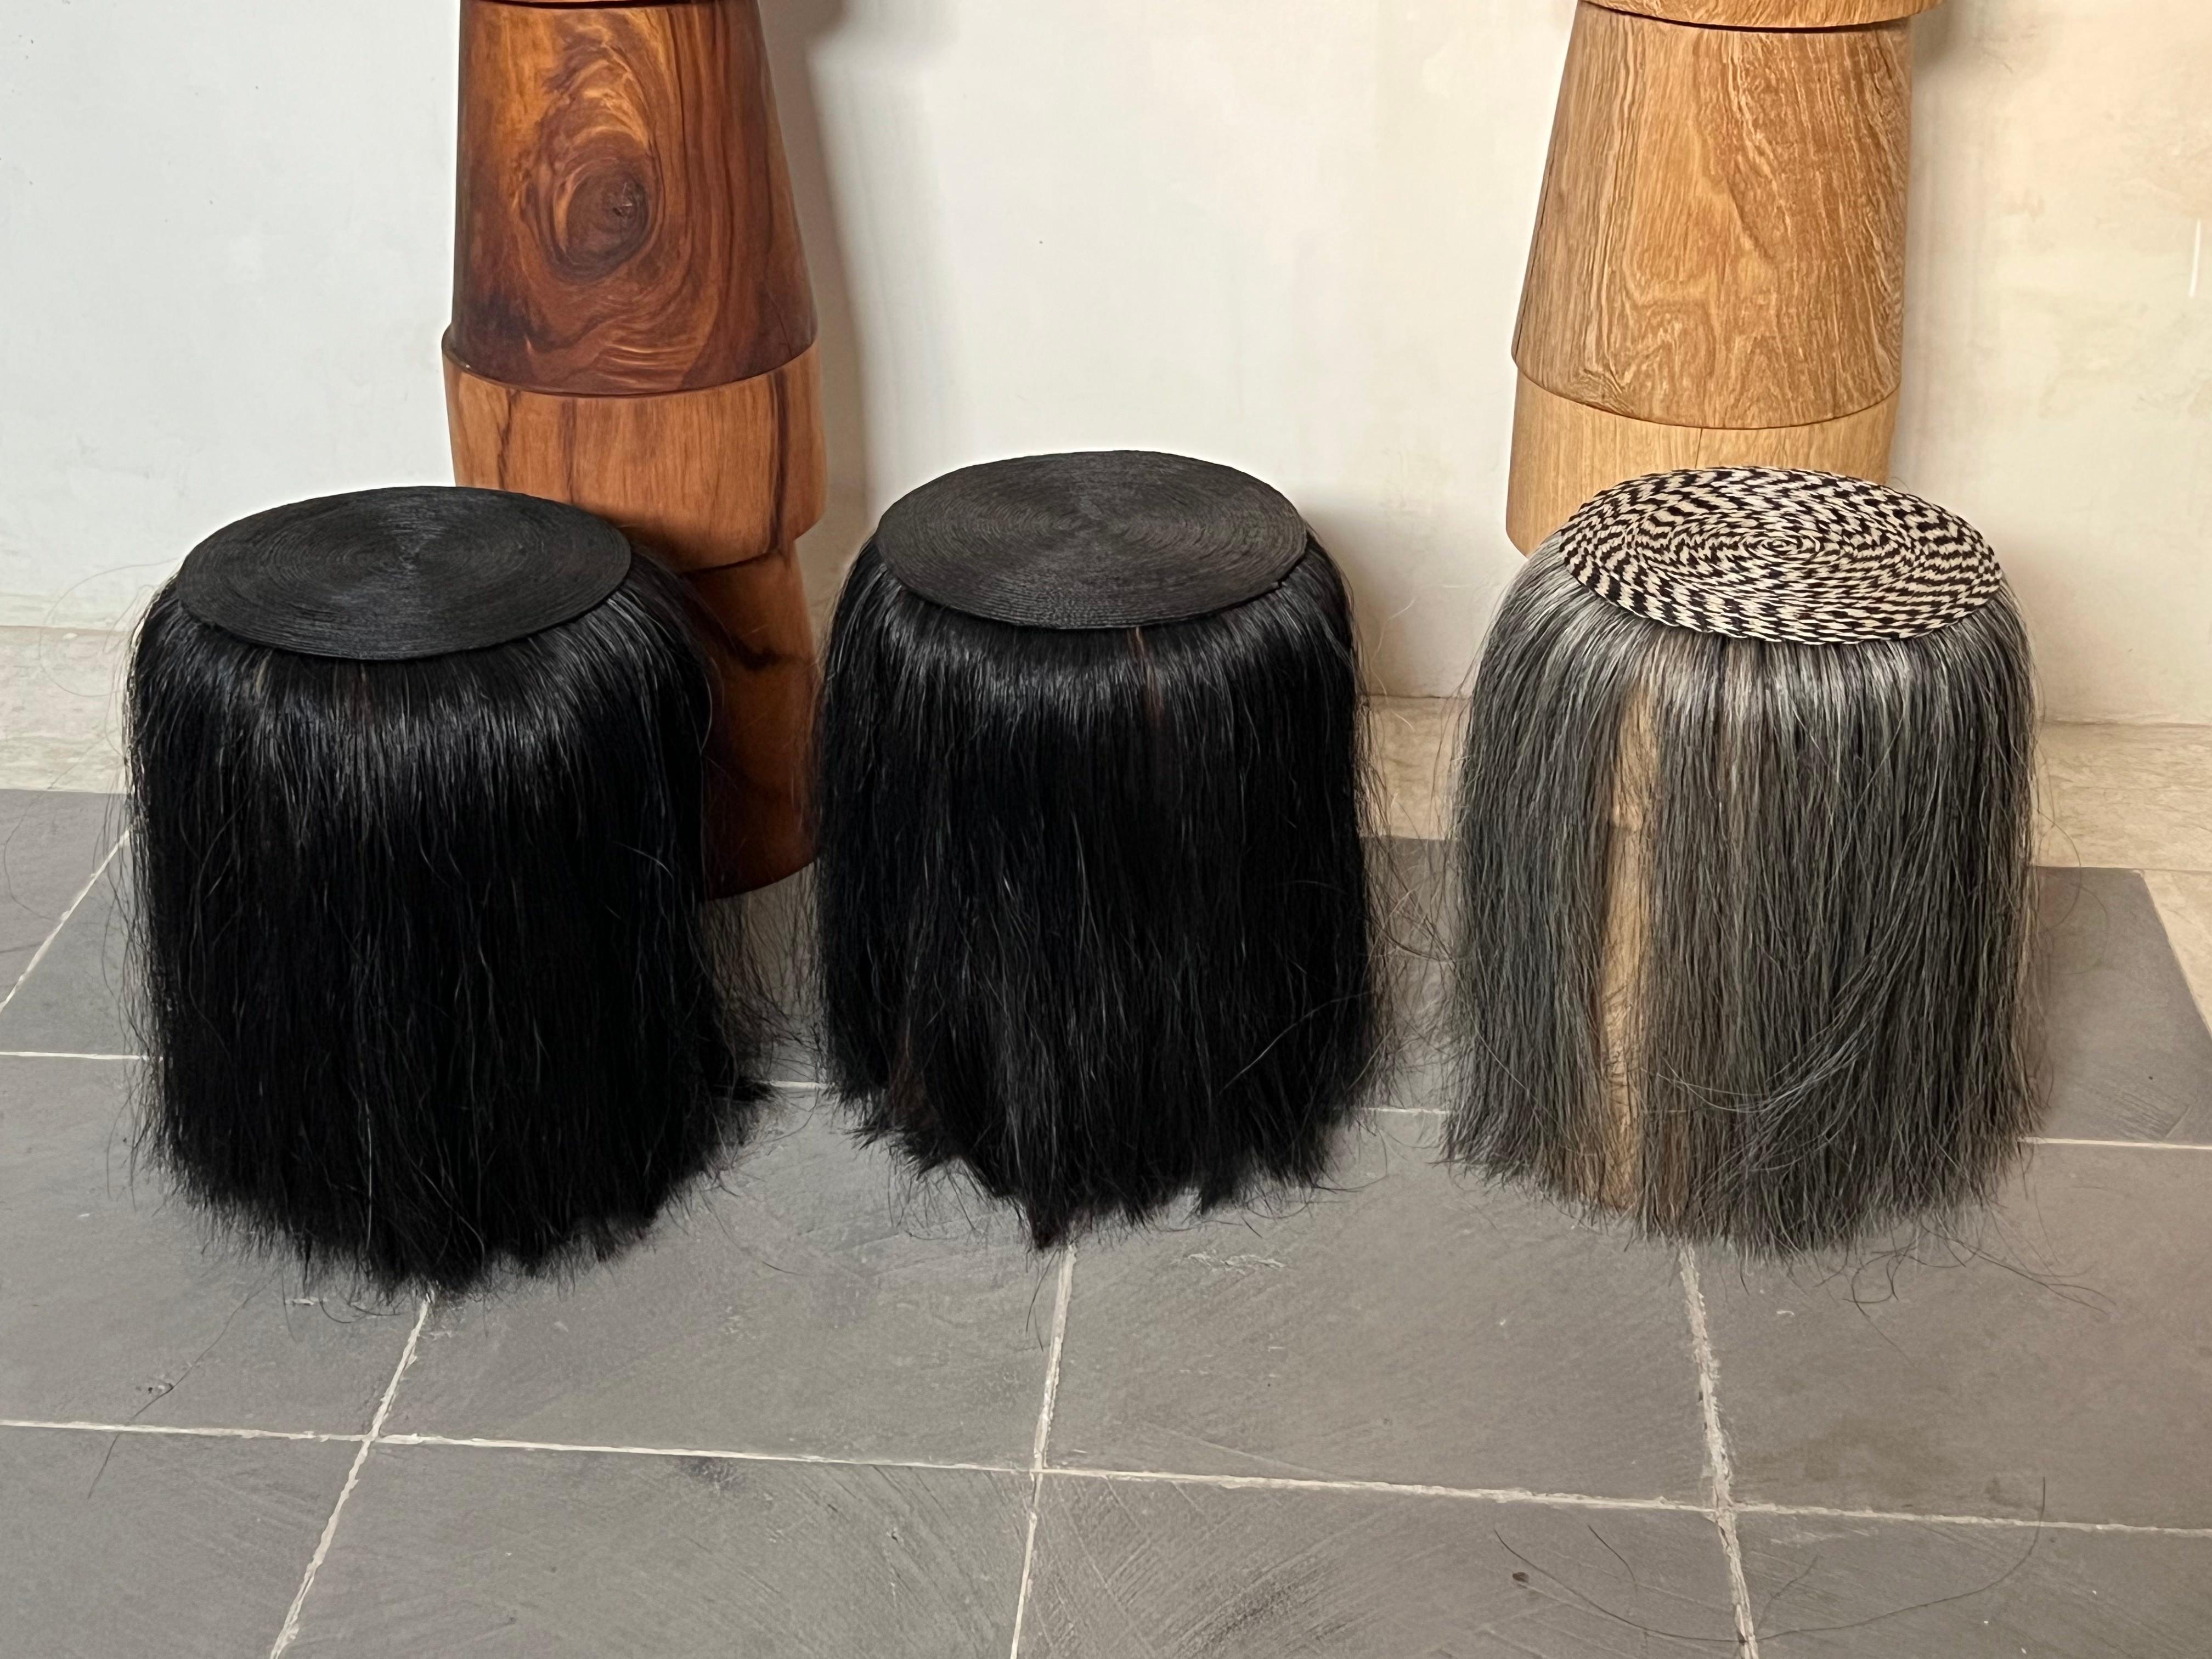 Turned Cuaco Stool - Black handwoven horsehair solid wood stool from Mexico. For Sale